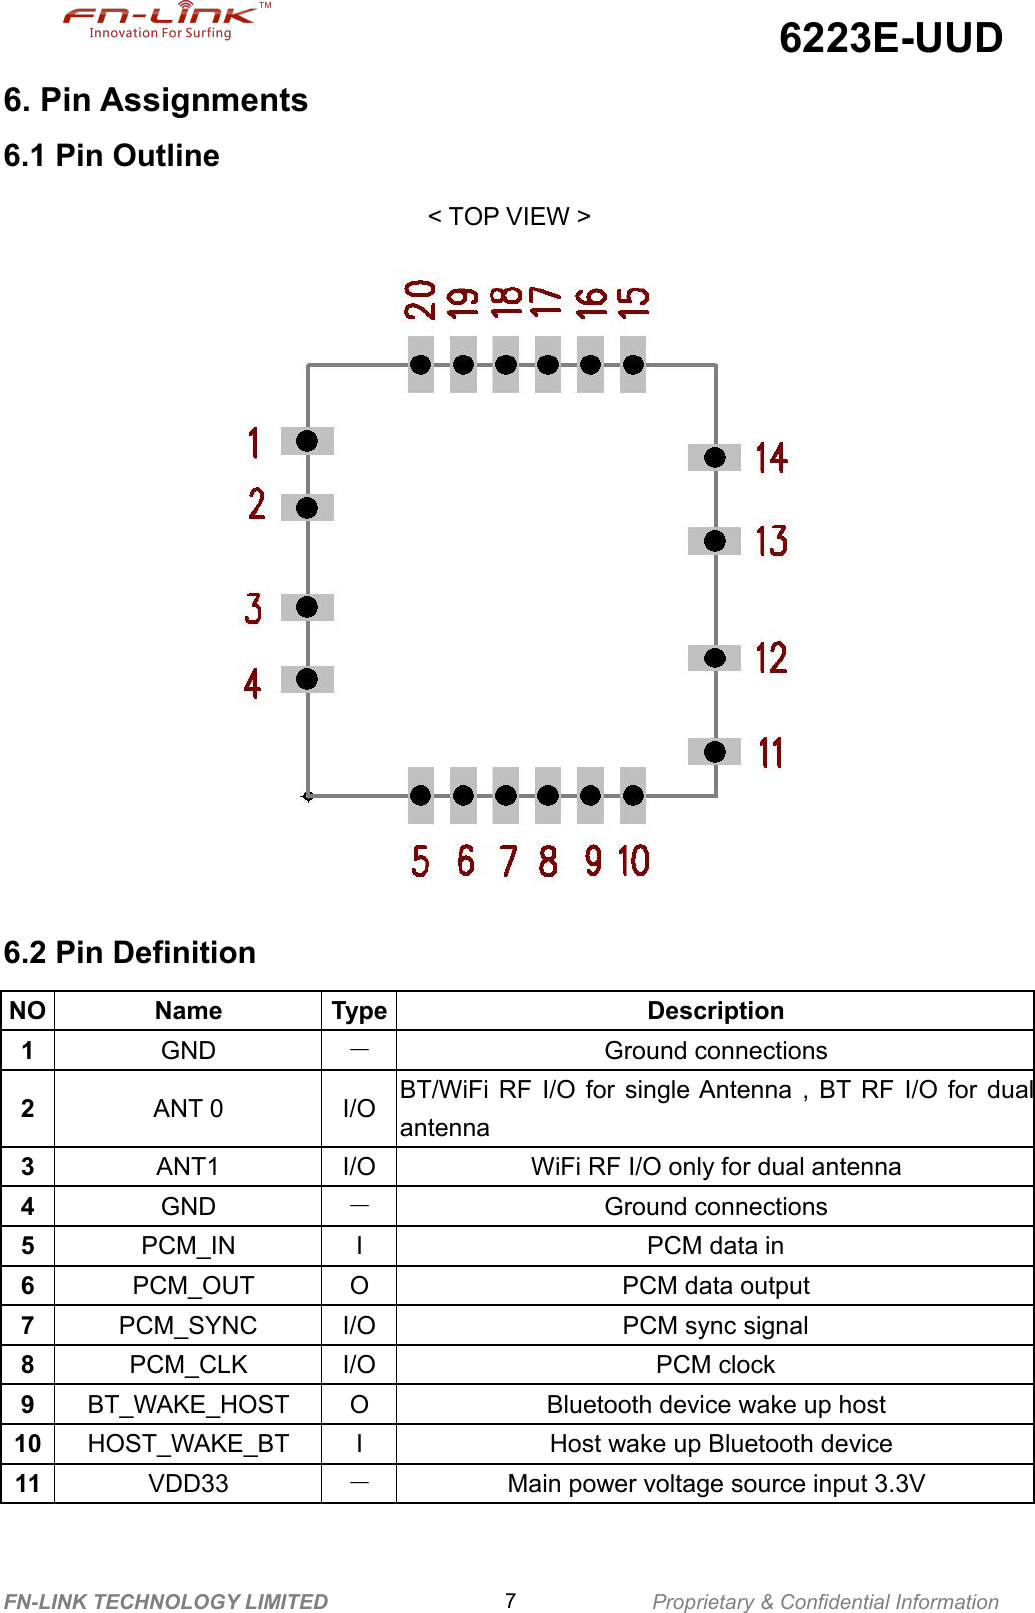 6223E-UUDFN-LINK TECHNOLOGY LIMITED 7Proprietary &amp; Confidential Information6. Pin Assignments6.1 Pin Outline&lt; TOP VIEW &gt;6.2 Pin DefinitionNO Name Type Description1GND －Ground connections2ANT 0 I/O BT/WiFi RF I/O for single Antenna , BT RF I/O for dualantenna3ANT1 I/O WiFi RF I/O only for dual antenna4GND －Ground connections5PCM_IN I PCM data in6PCM_OUT O PCM data output7PCM_SYNC I/O PCM sync signal8PCM_CLK I/O PCM clock9BT_WAKE_HOST O Bluetooth device wake up host10 HOST_WAKE_BT I Host wake up Bluetooth device11 VDD33 －Main power voltage source input 3.3V